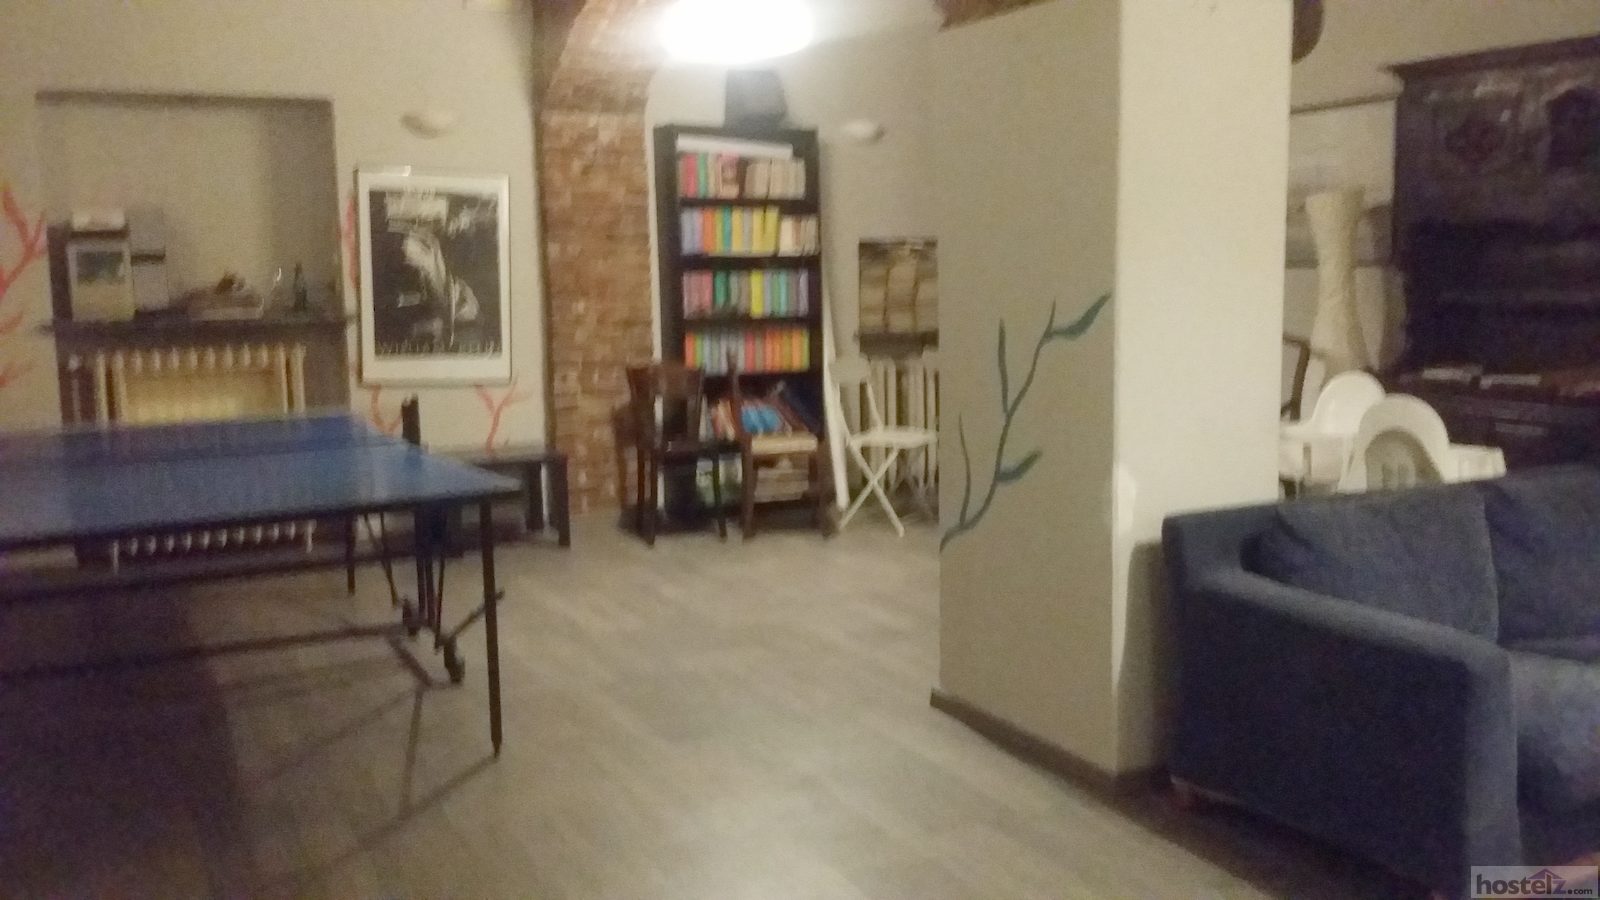 Tomato Backpackers Hotel, Turin